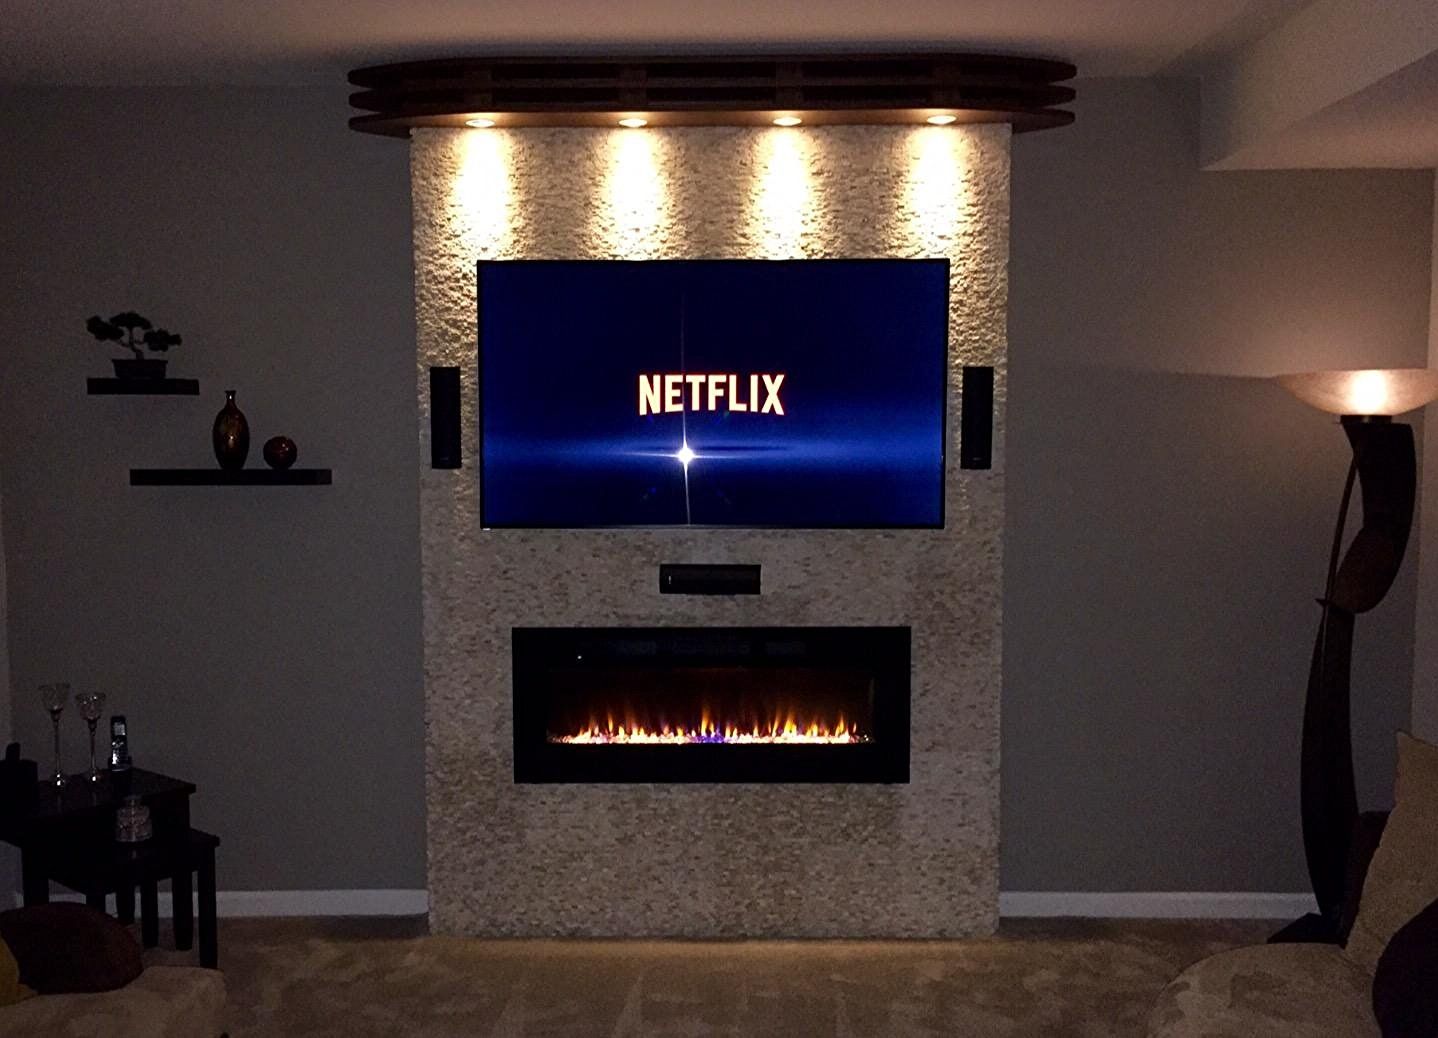 Touchstone 80004 Sideline Electric Fireplace Awesome 125 Best Movie & Game Room Images In 2019